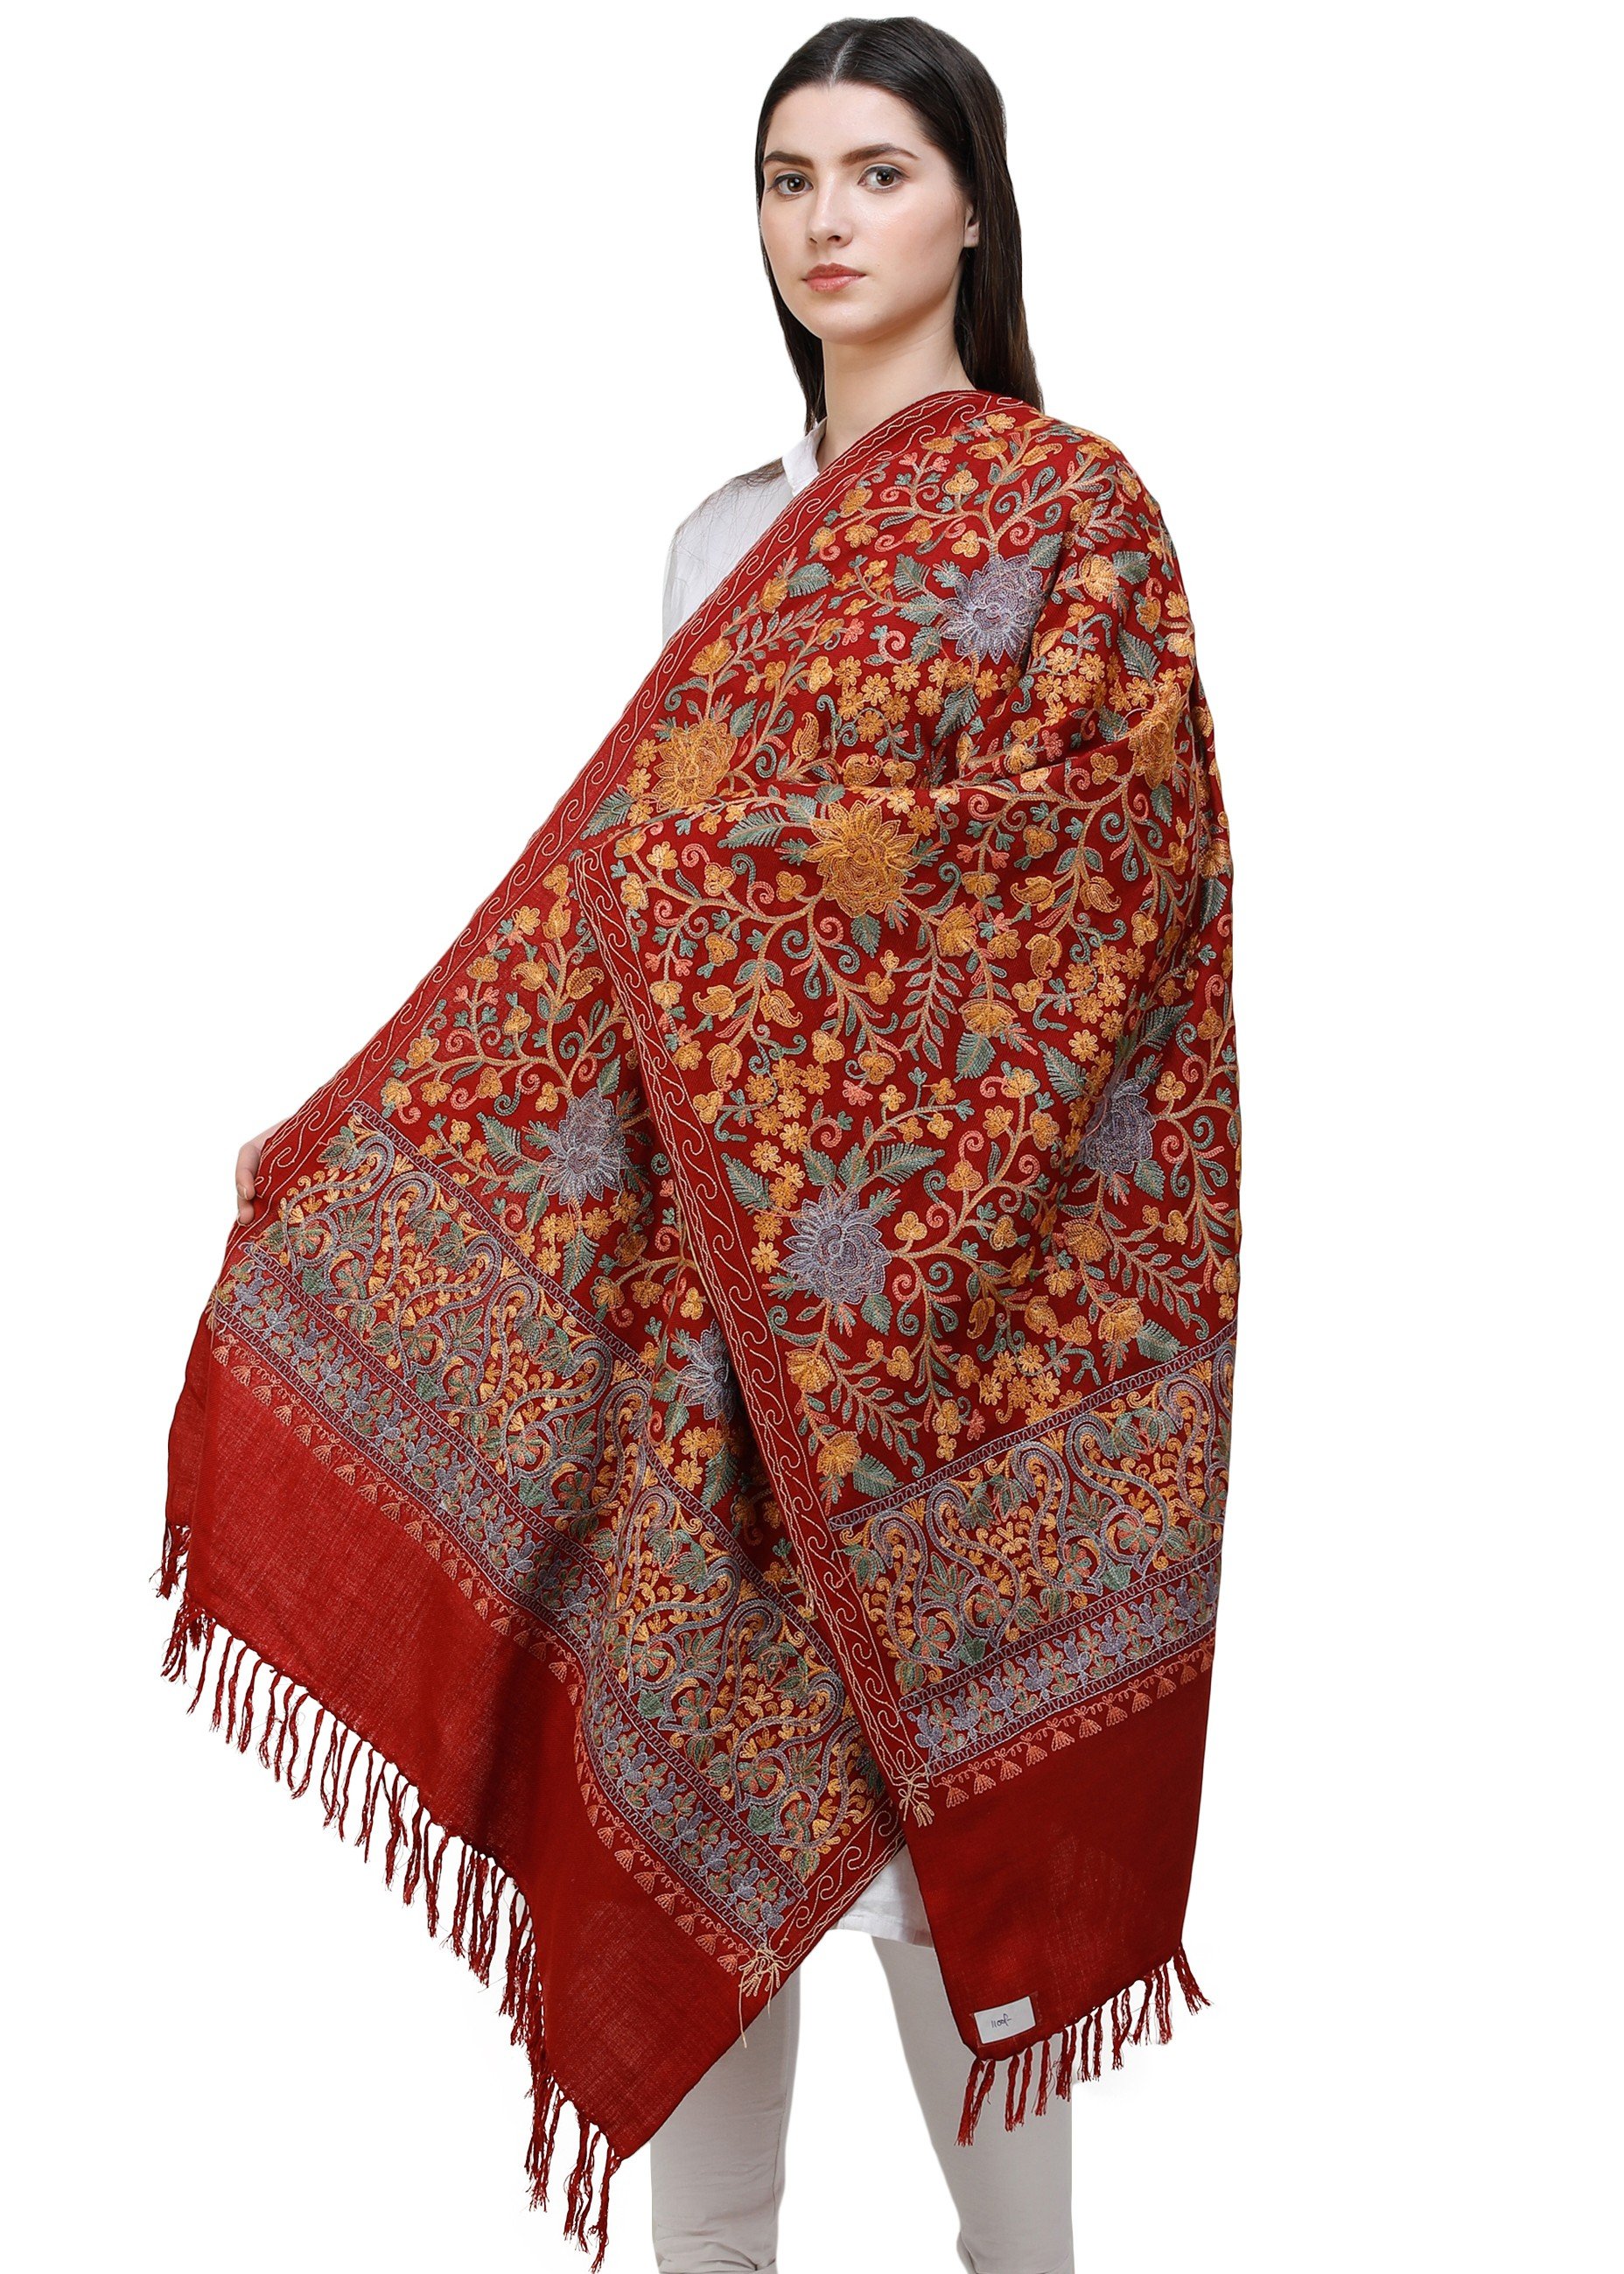 Karanda Red Shawls from Amritsar with Aari Embroidered Flowers All-over ...